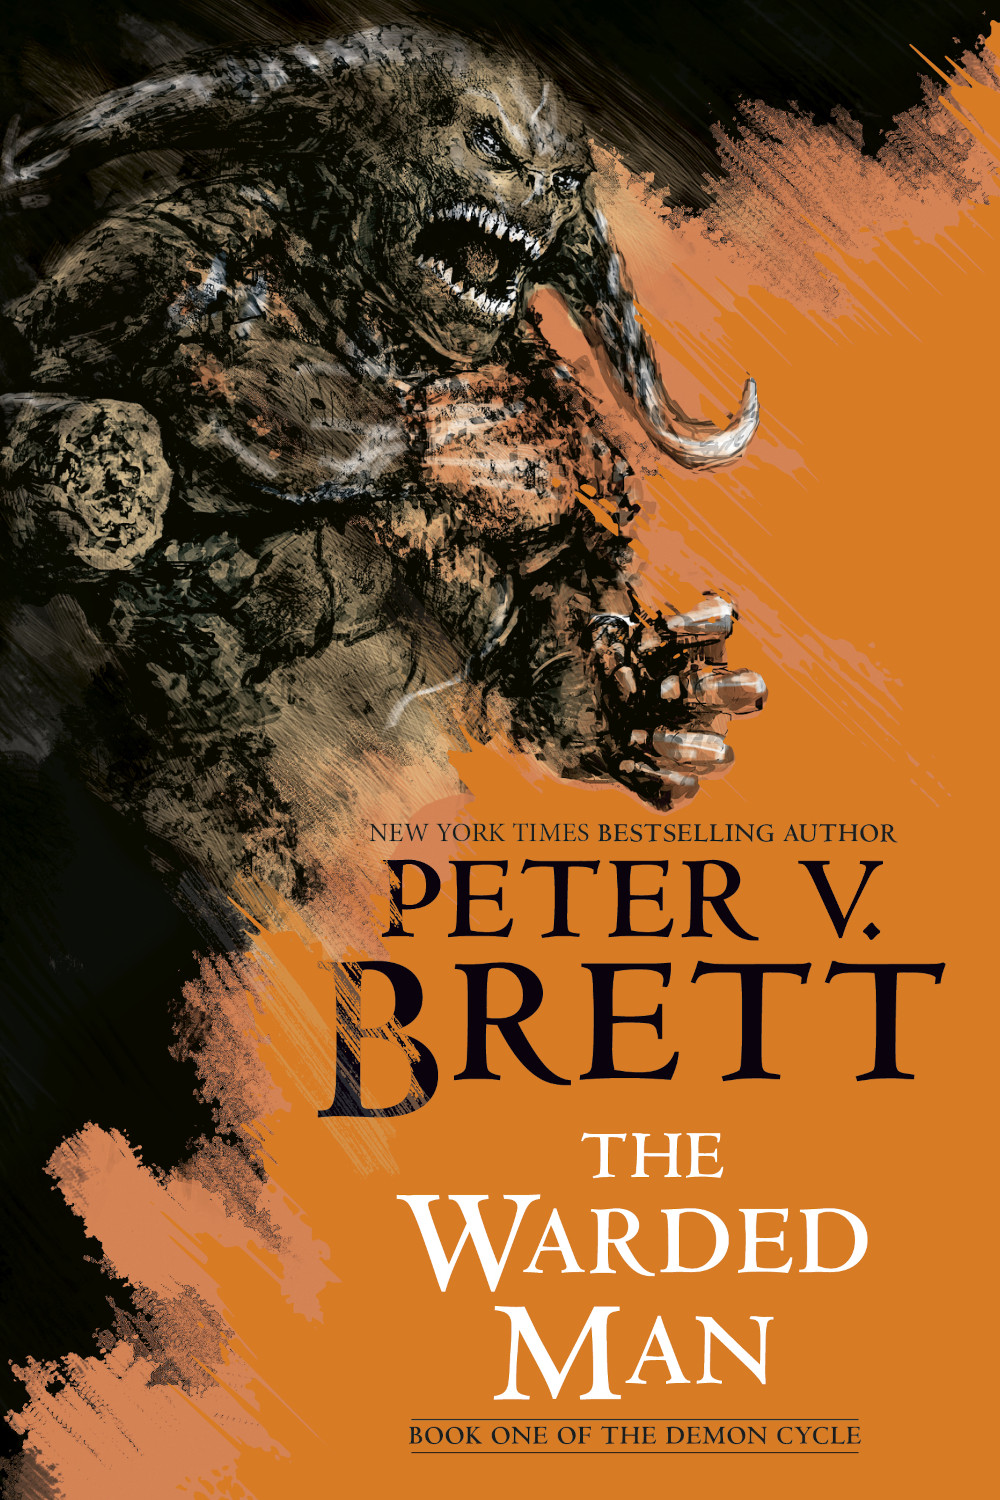 The Warded Man by Peter V. Brett, Book One of The Demon Cycle (US cover)